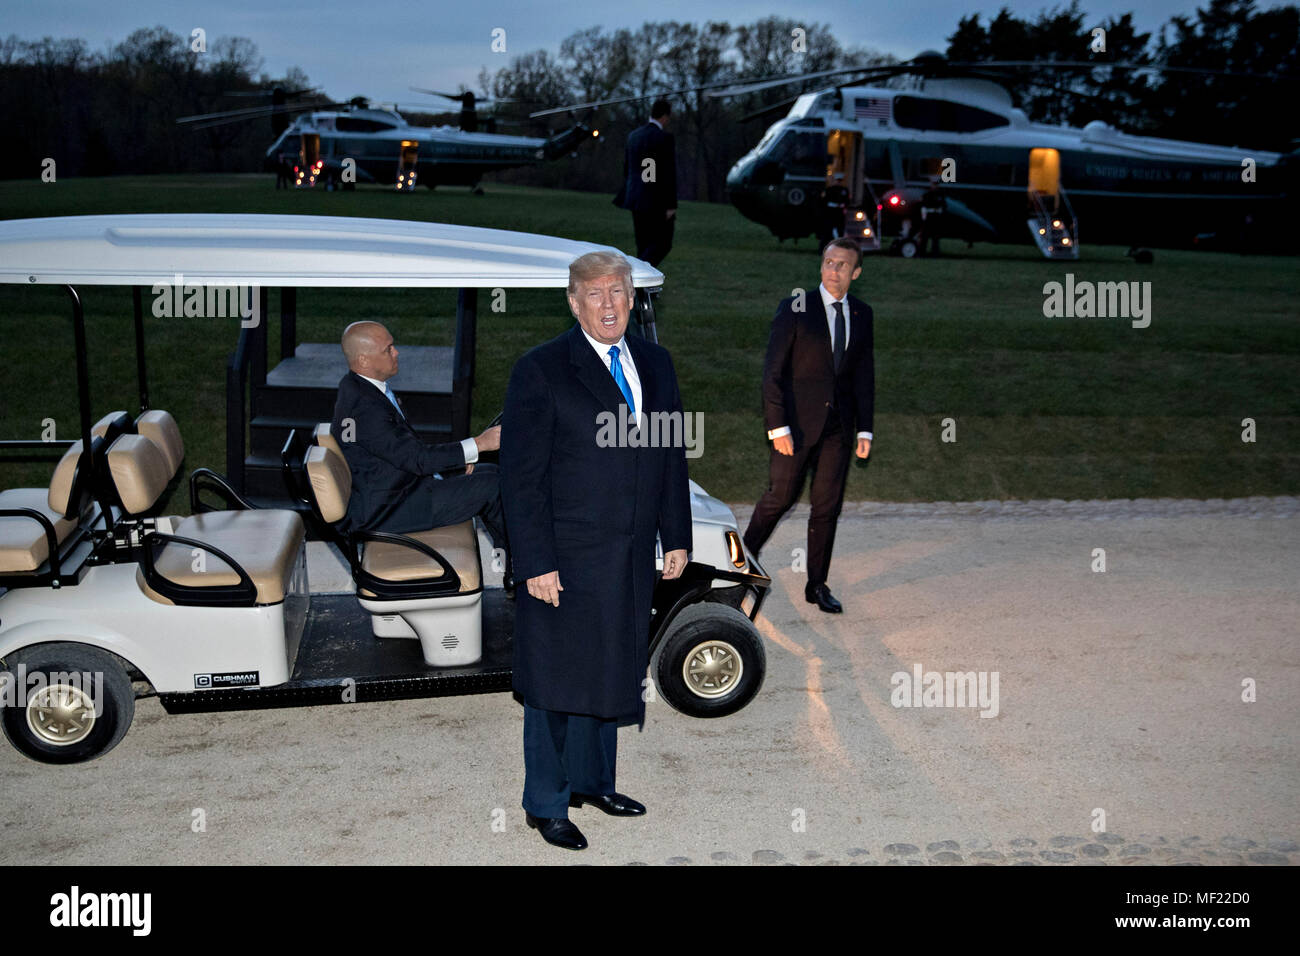 U.S. President Donald Trump speaks to members of the media after stepping out of a golf cart following a dinner with Emmanuel Macron, France's president, right, at the Mount Vernon estate of first U.S. President George Washington in Mount Vernon, Virginia, U.S., on Monday, April 23, 2018. As Macron arrives for the first state visit of Trump's presidency, the U.S. leader is threatening to upend the global trading system with tariffs on China, maybe Europe too. Credit: Andrew Harrer/Pool via CNP Photo via Credit: Newscom/Alamy Live News Stock Photo